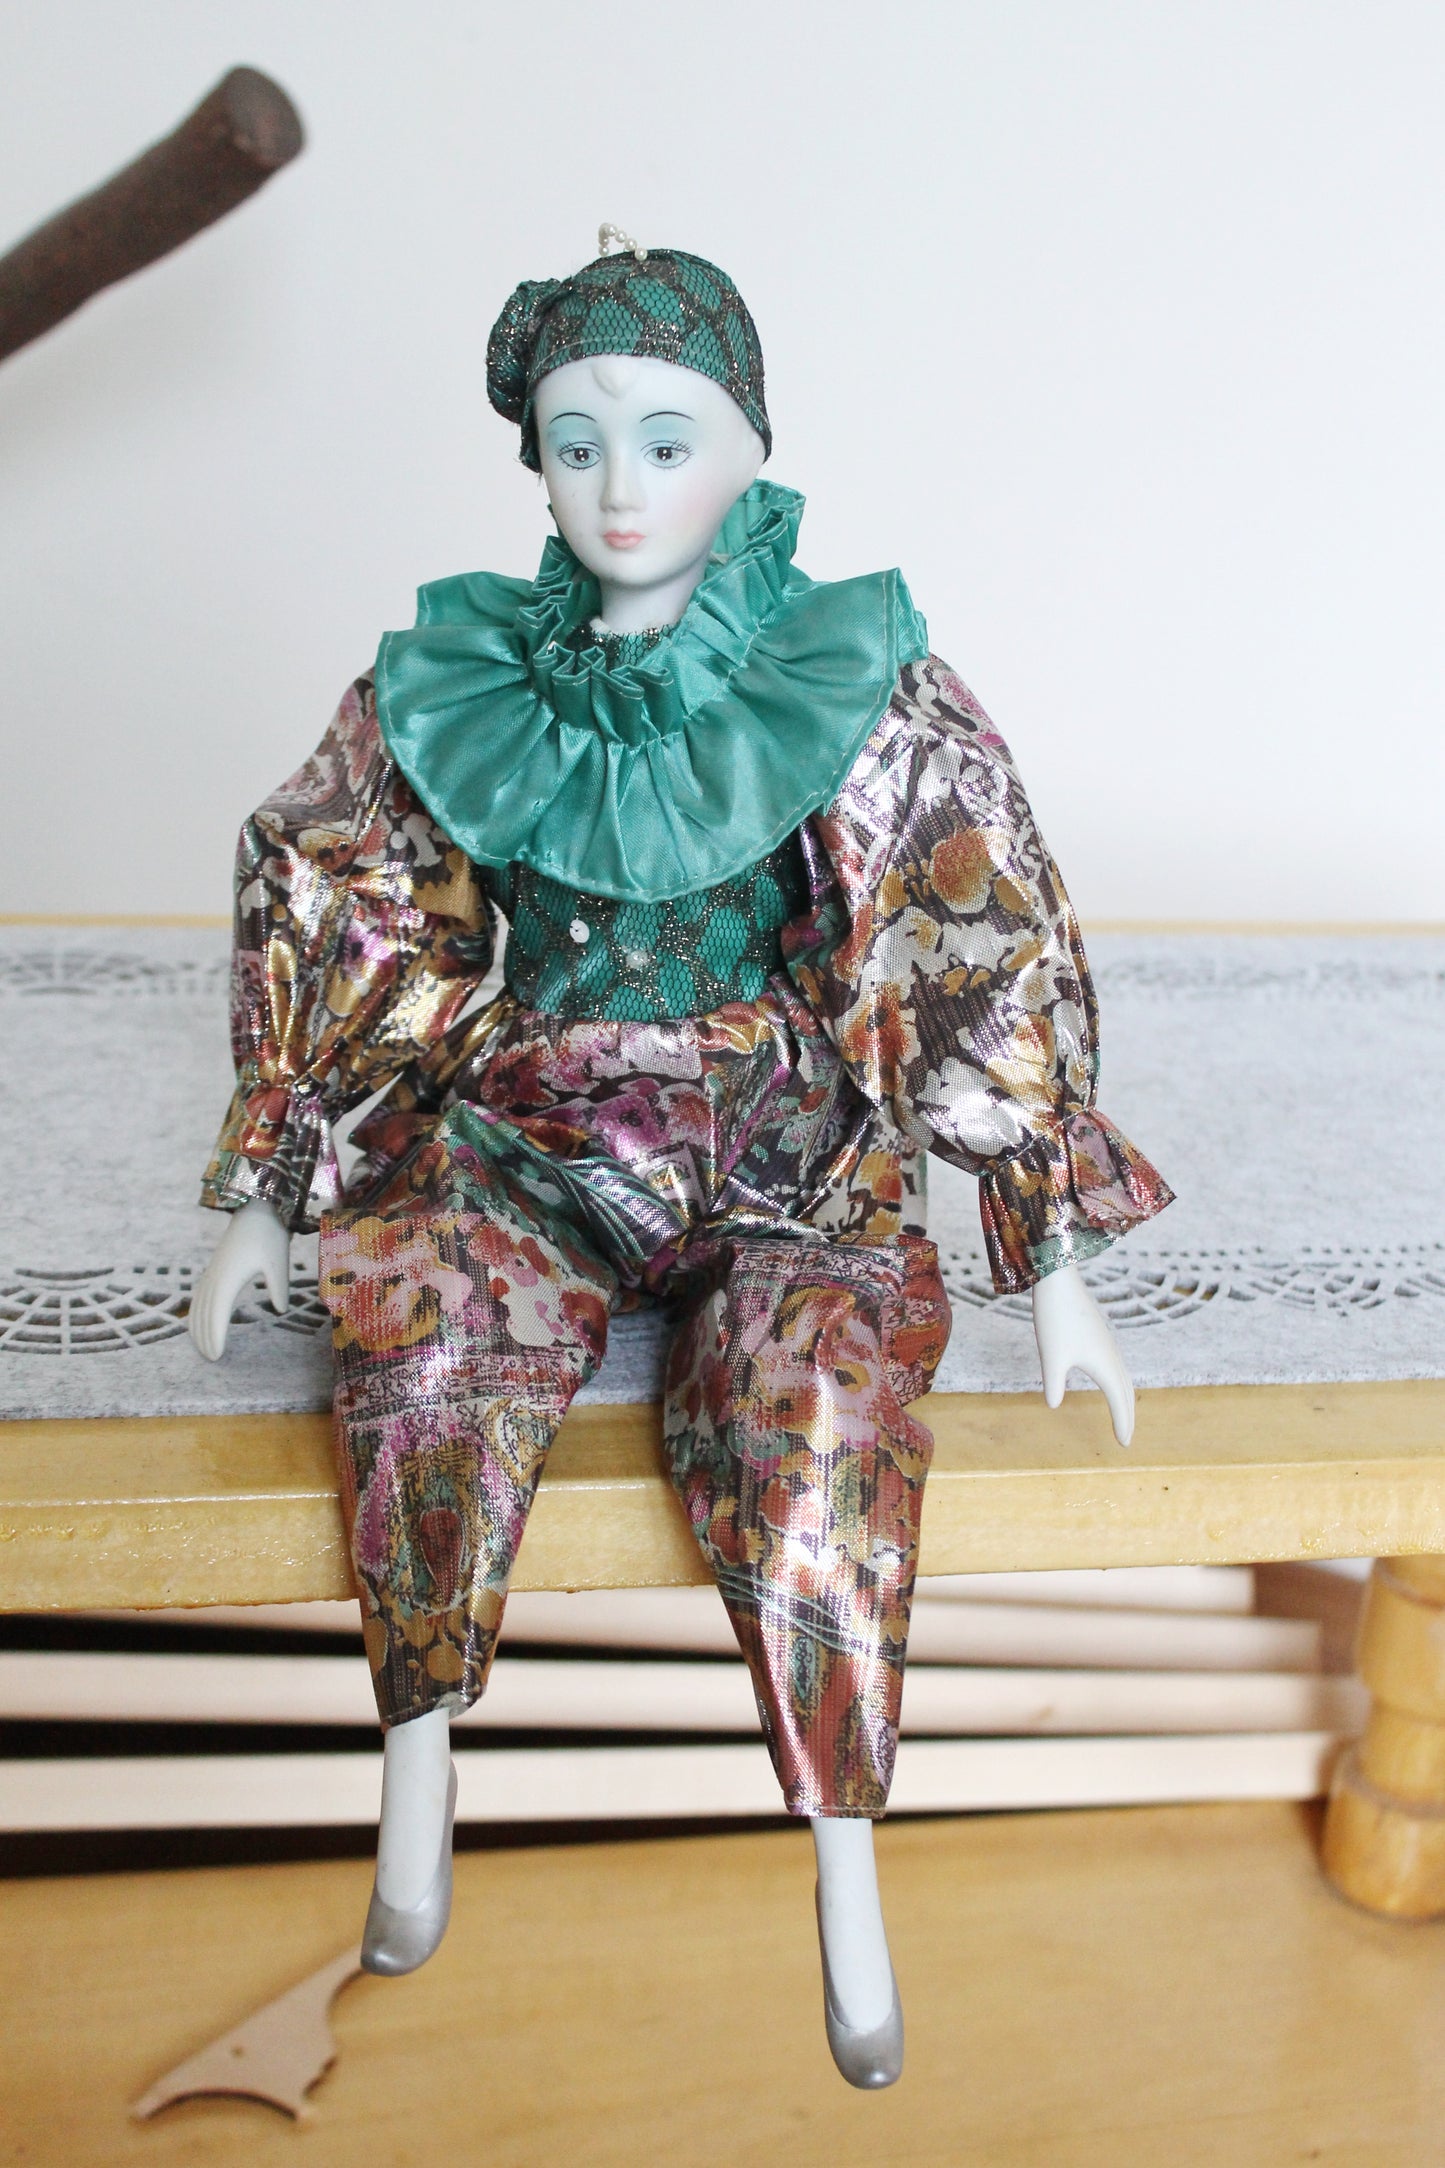 Vintage porcelain Venetian doll - Harlequin - 15.7 inches- collectible doll - porcelain doll - decor doll - 1980s